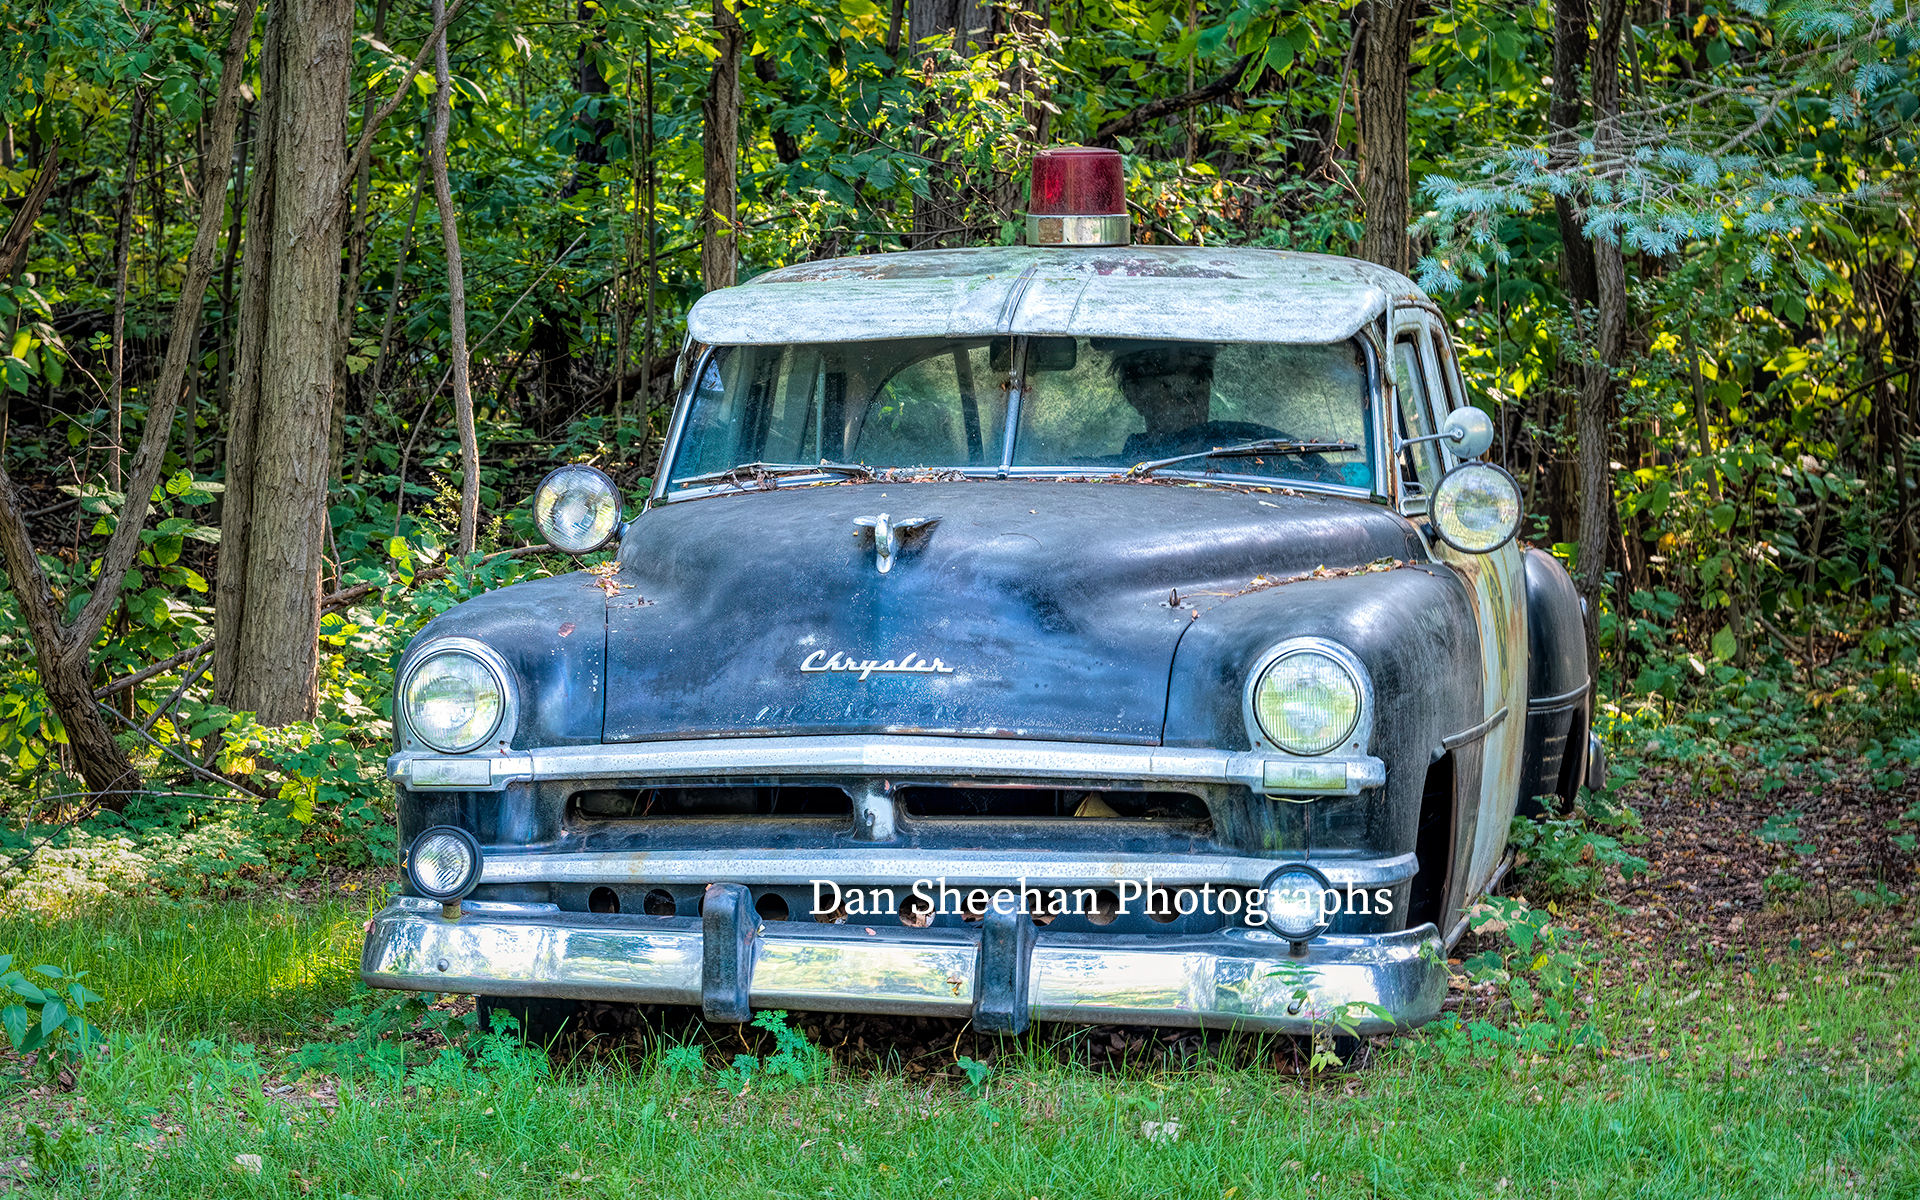 License And Registration : Cars : Dan Sheehan Photographs - Fine Art Stock Photography